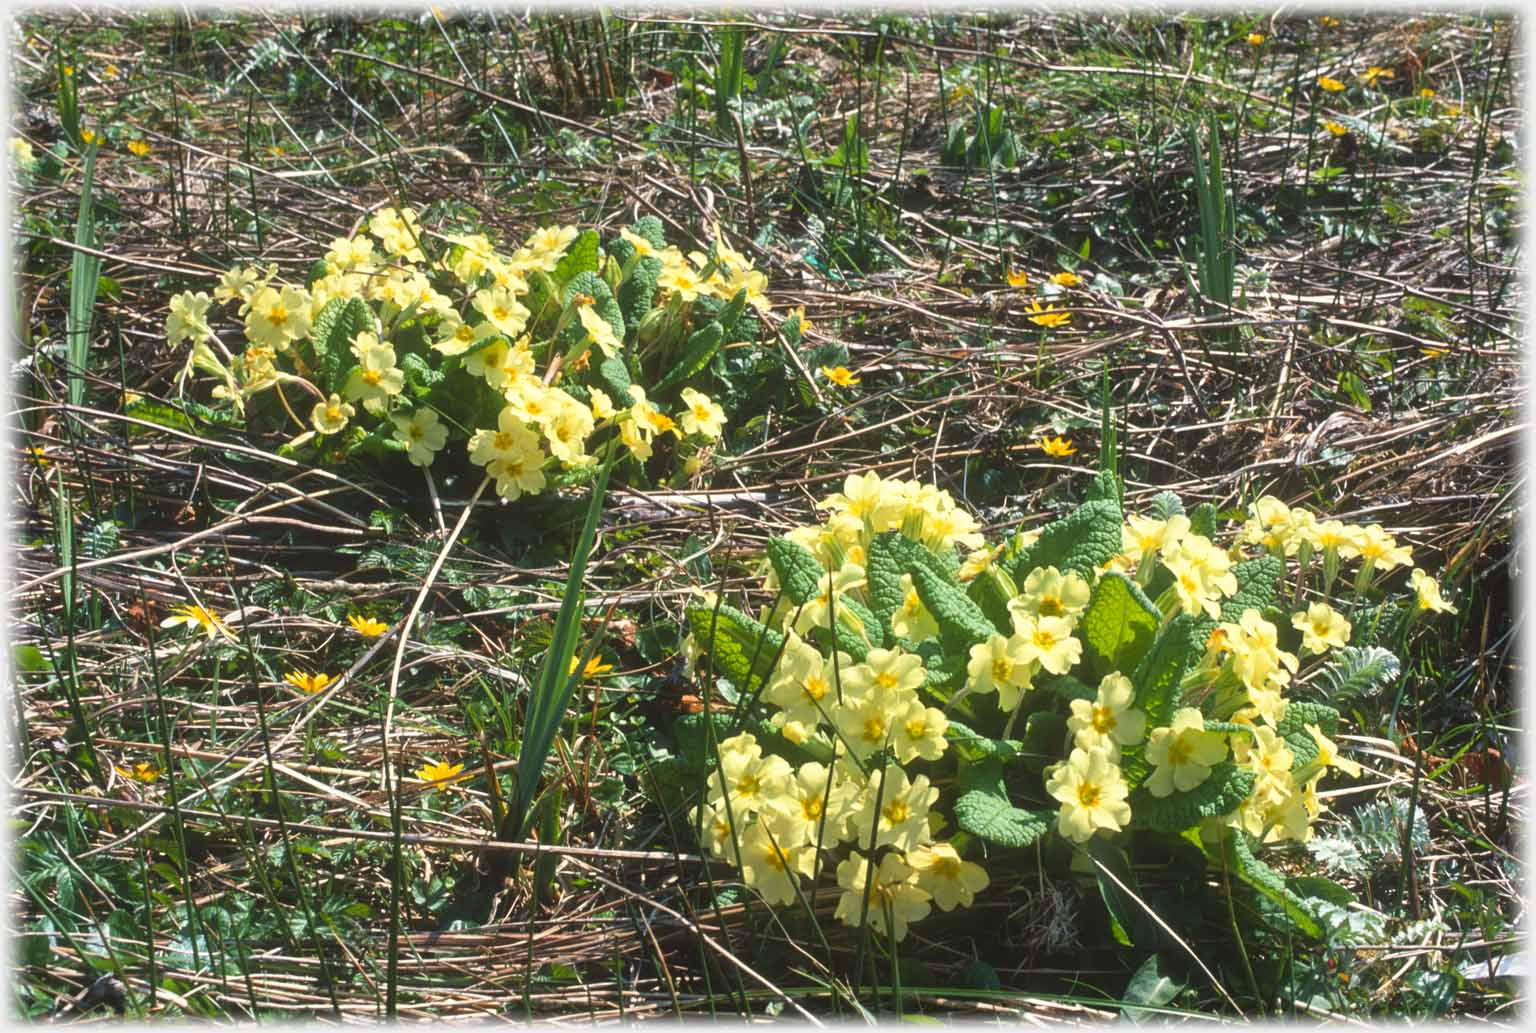 Two clumps of primroses.